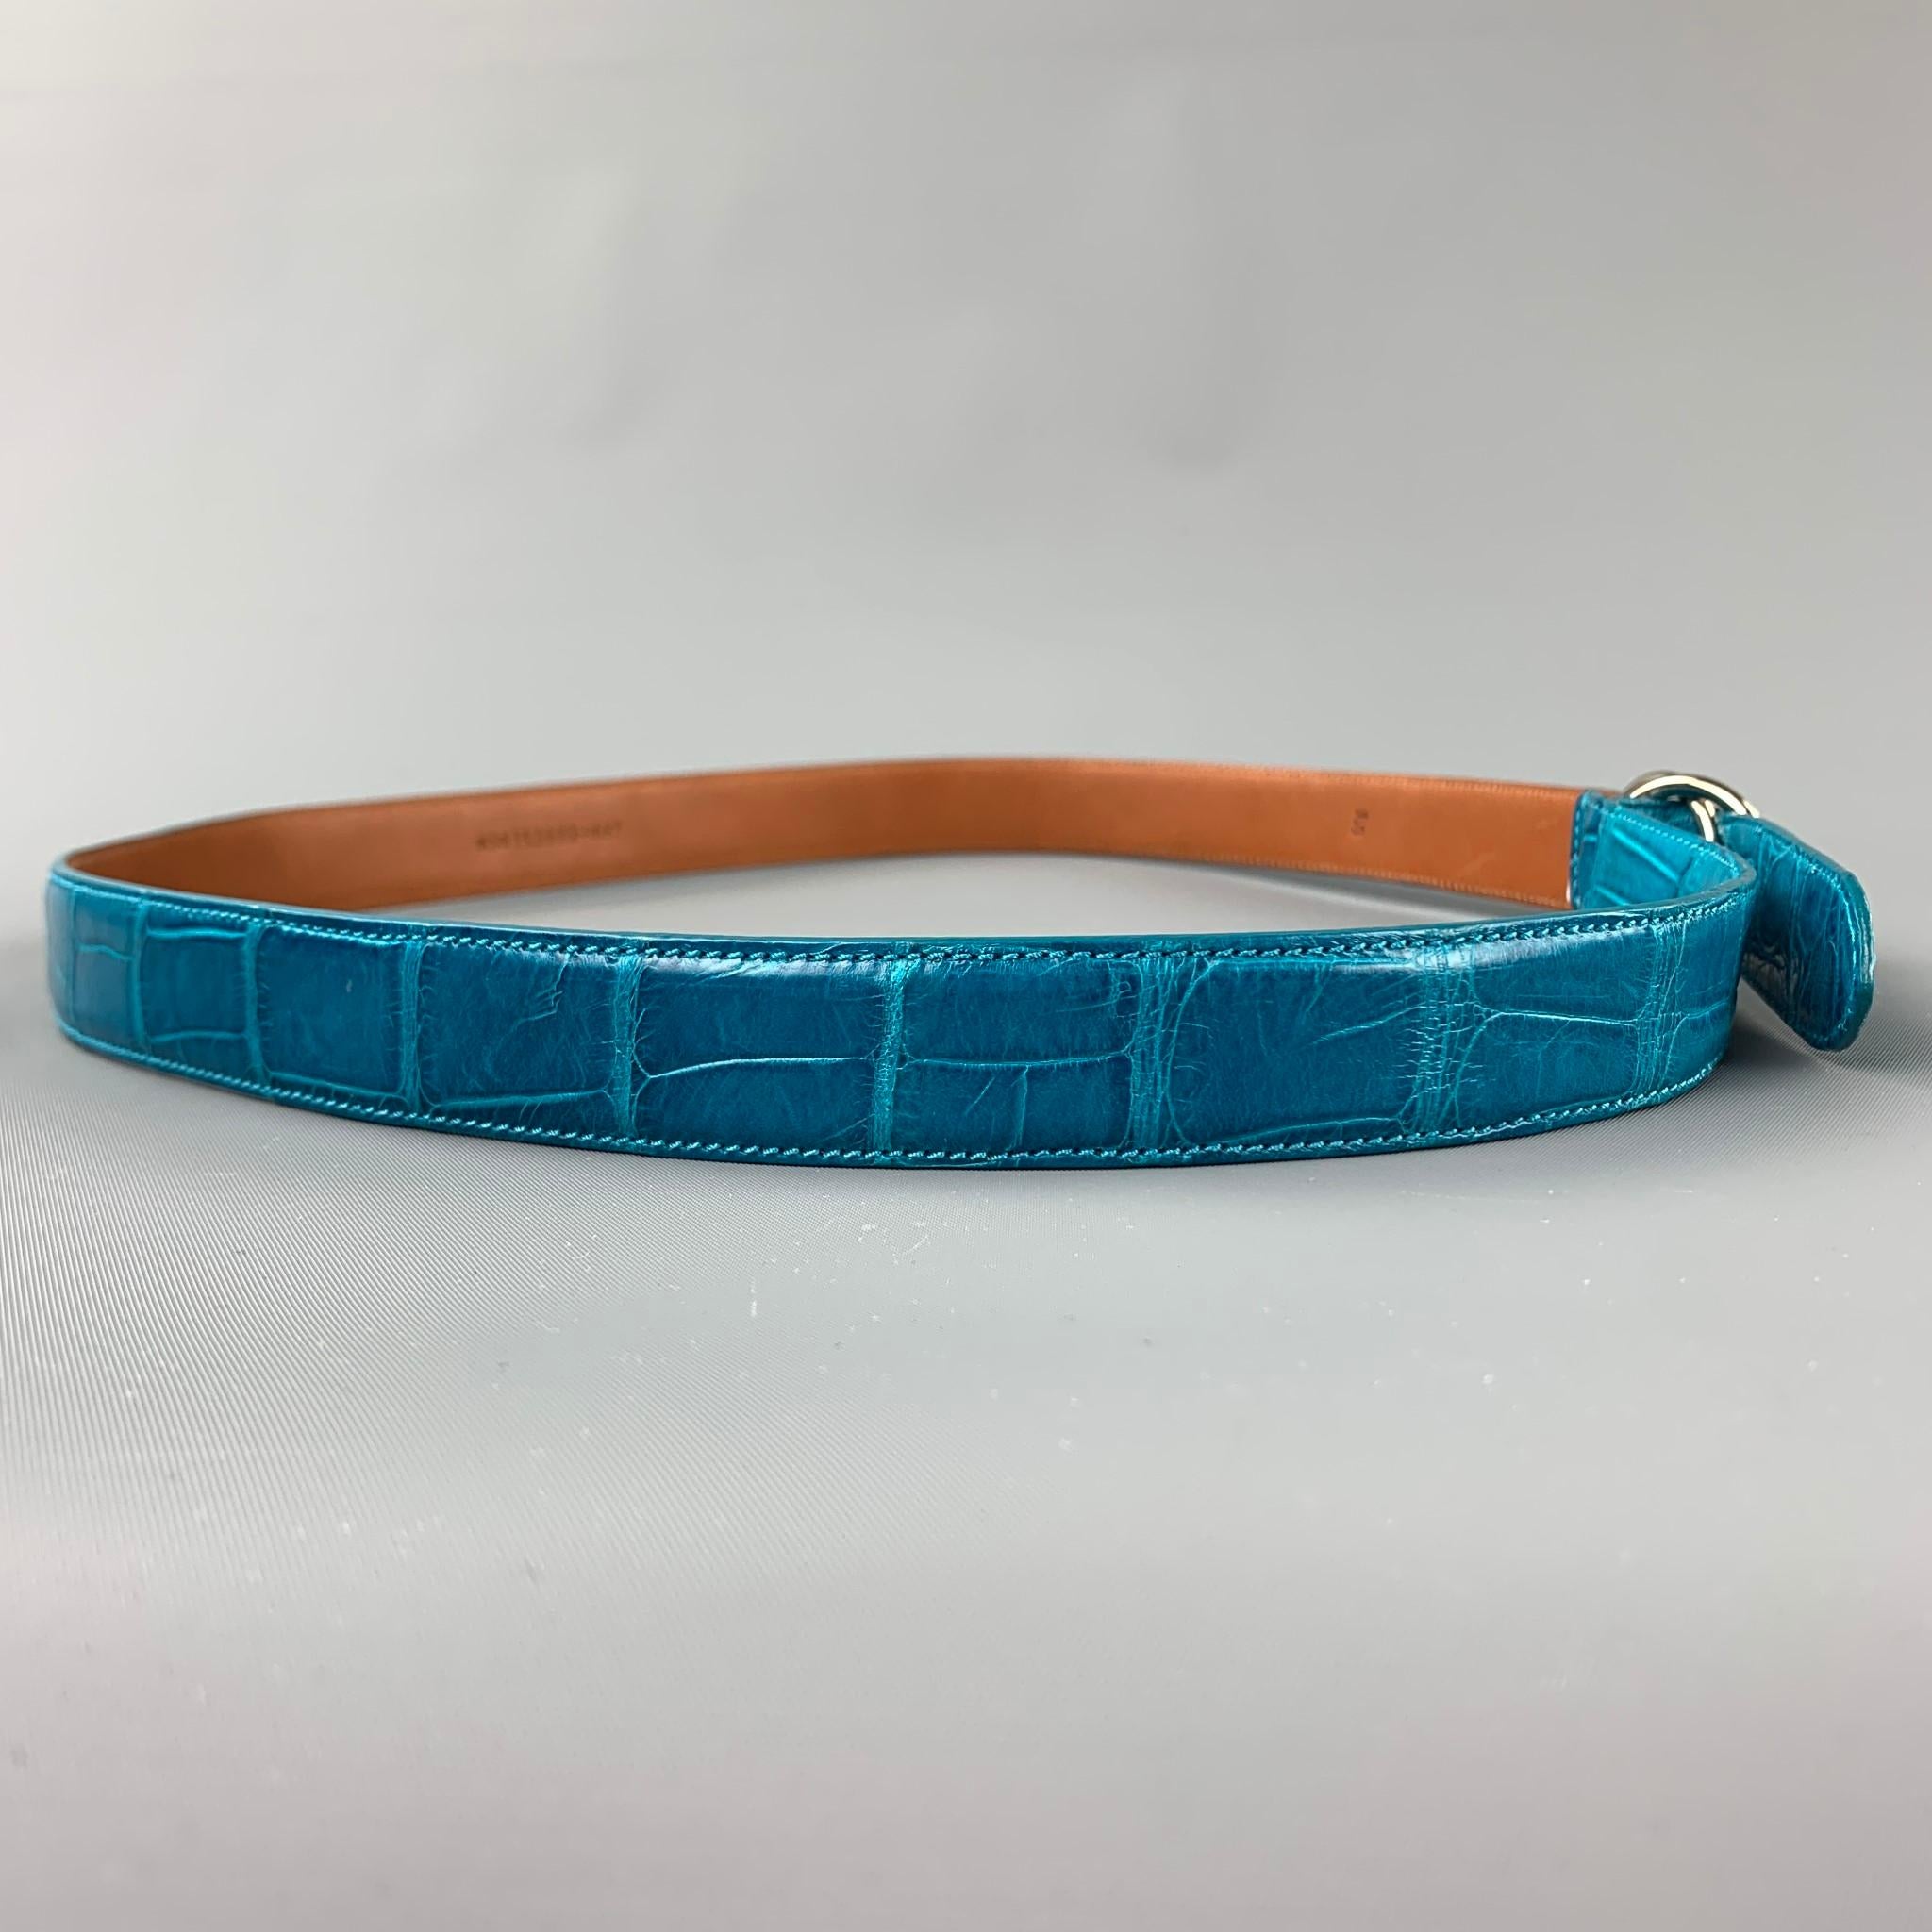 RALPH LAURE belt comes in a turquoise alligator featuring a silver tone double ring closure. Made in Italy.

Very Good Pre-Owned Condition.
Marked: M

Length: 43 in.
Width: 1 in.